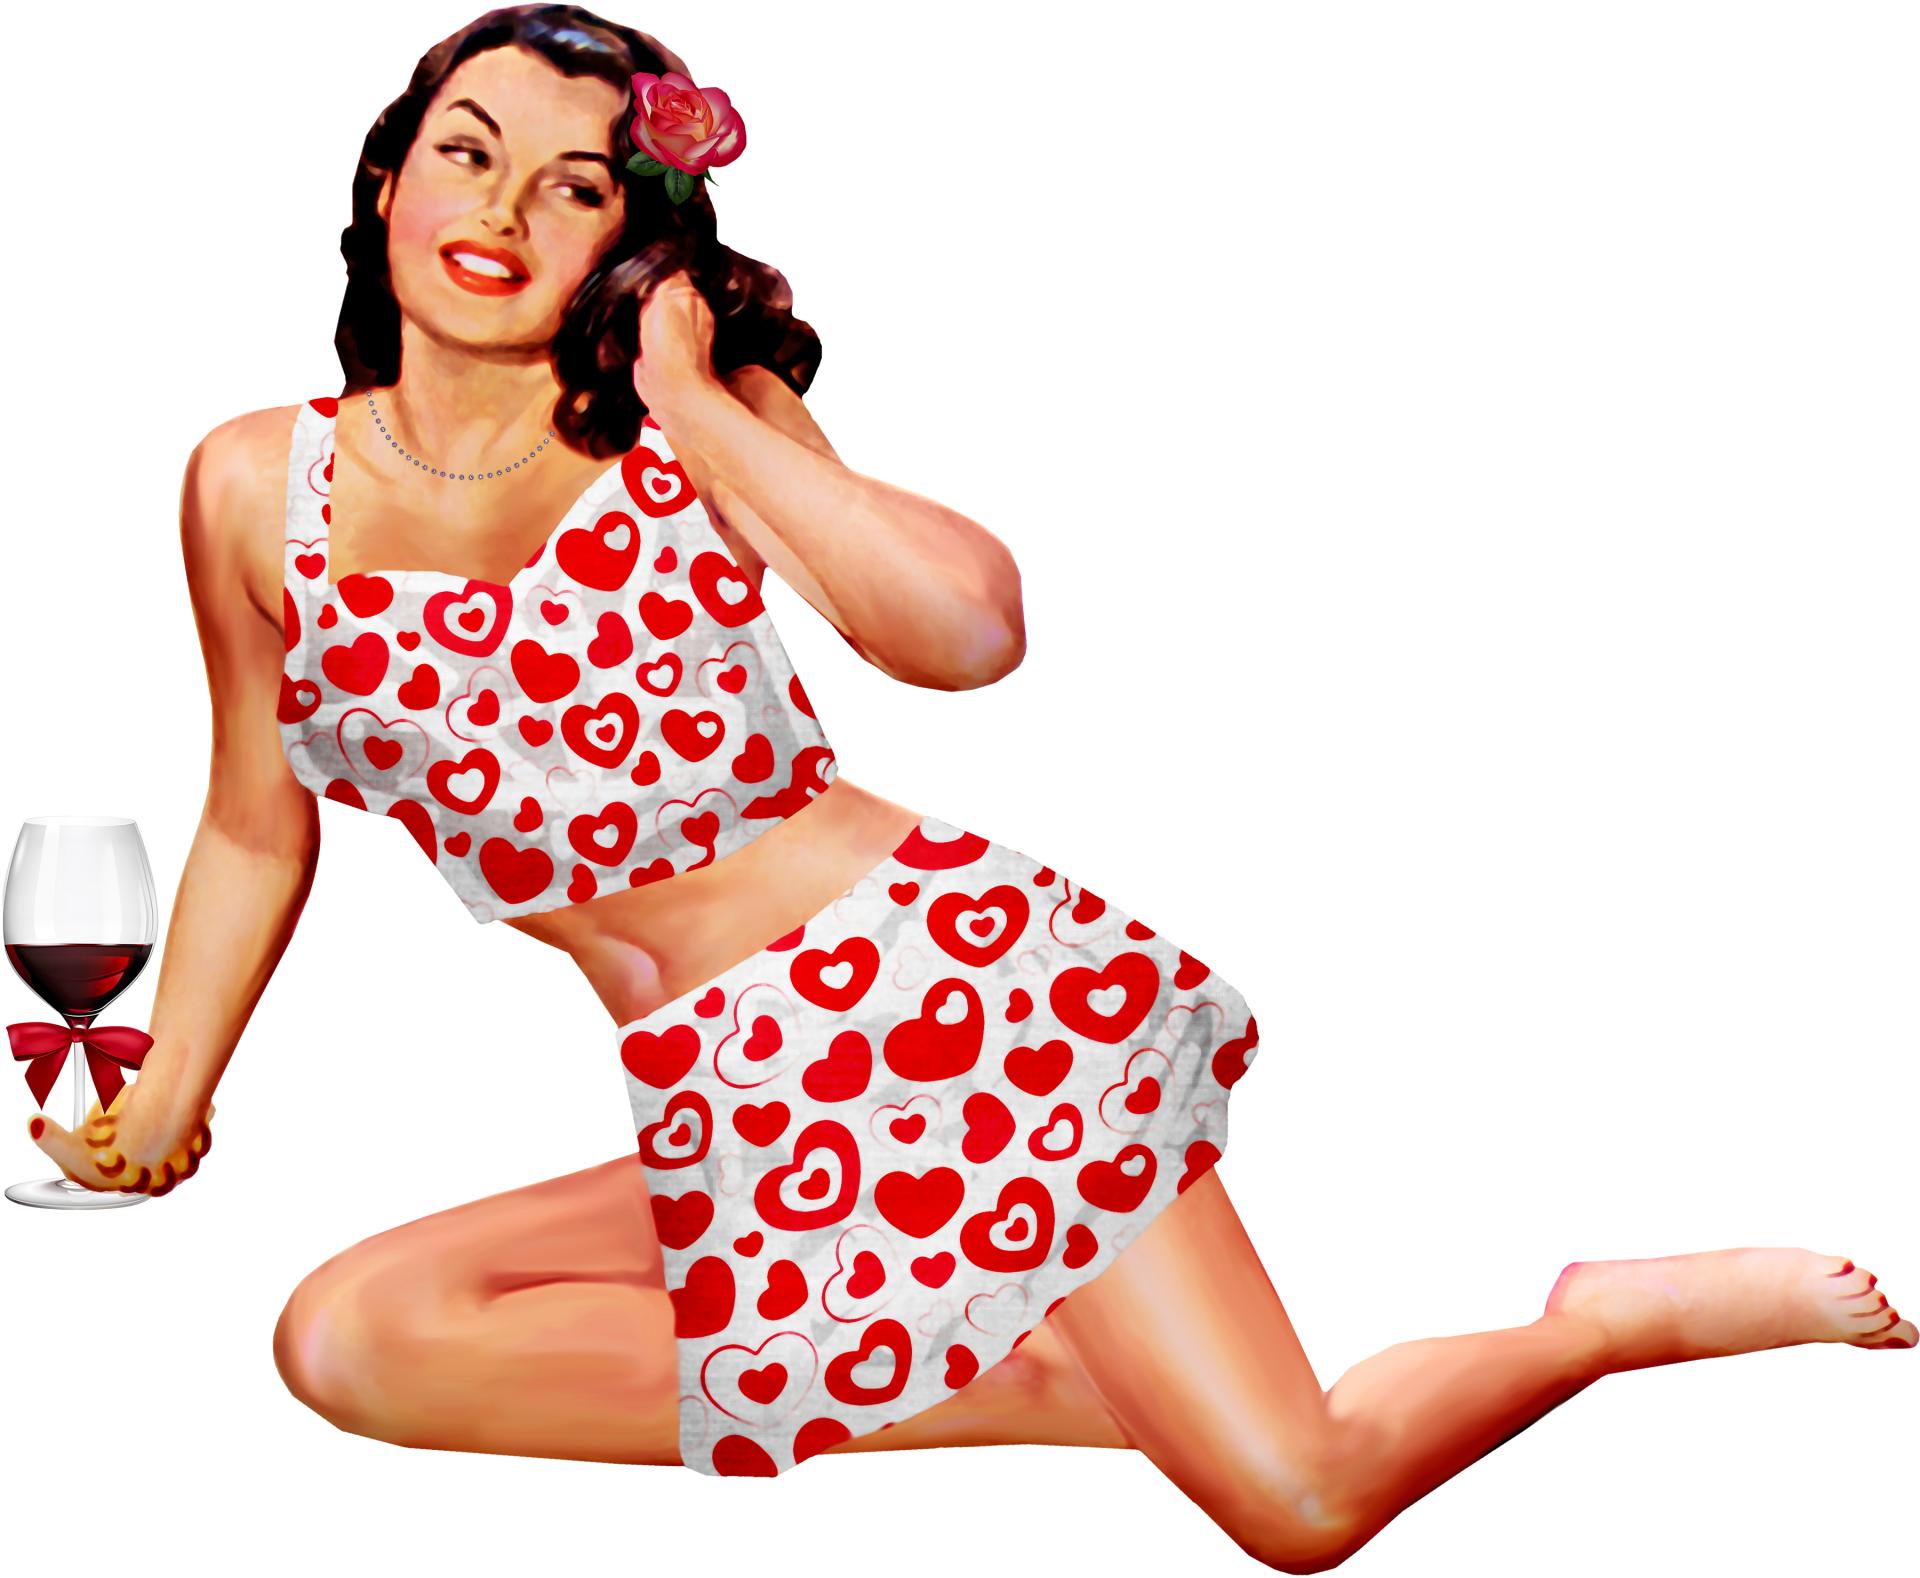 Pin Up Girl 40 And 039 S 50 And 039 Stock De Foto Gratis Public Domain